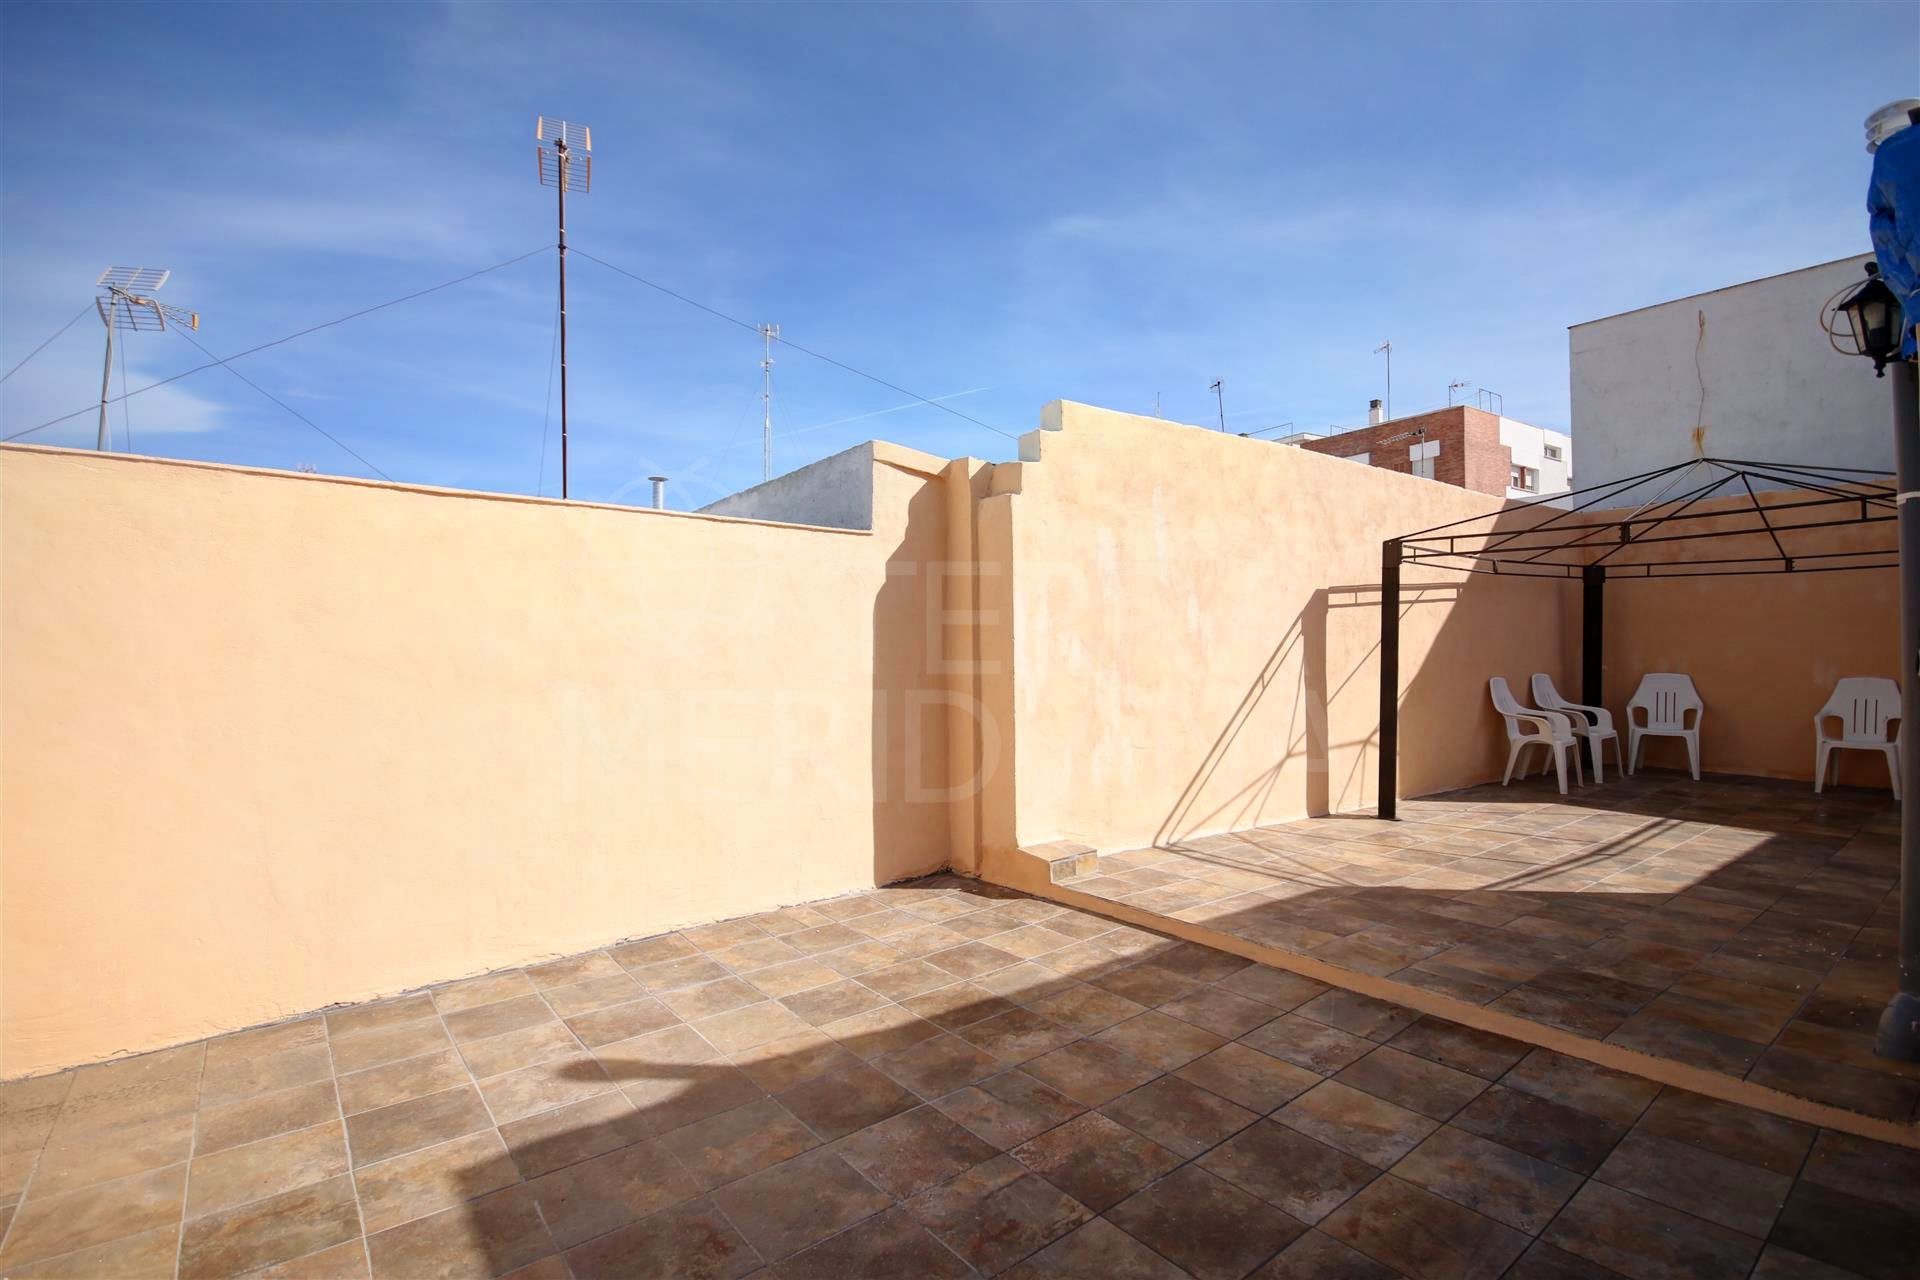 Townhouse for sale in Estepona old town with commercial premises and private apartment